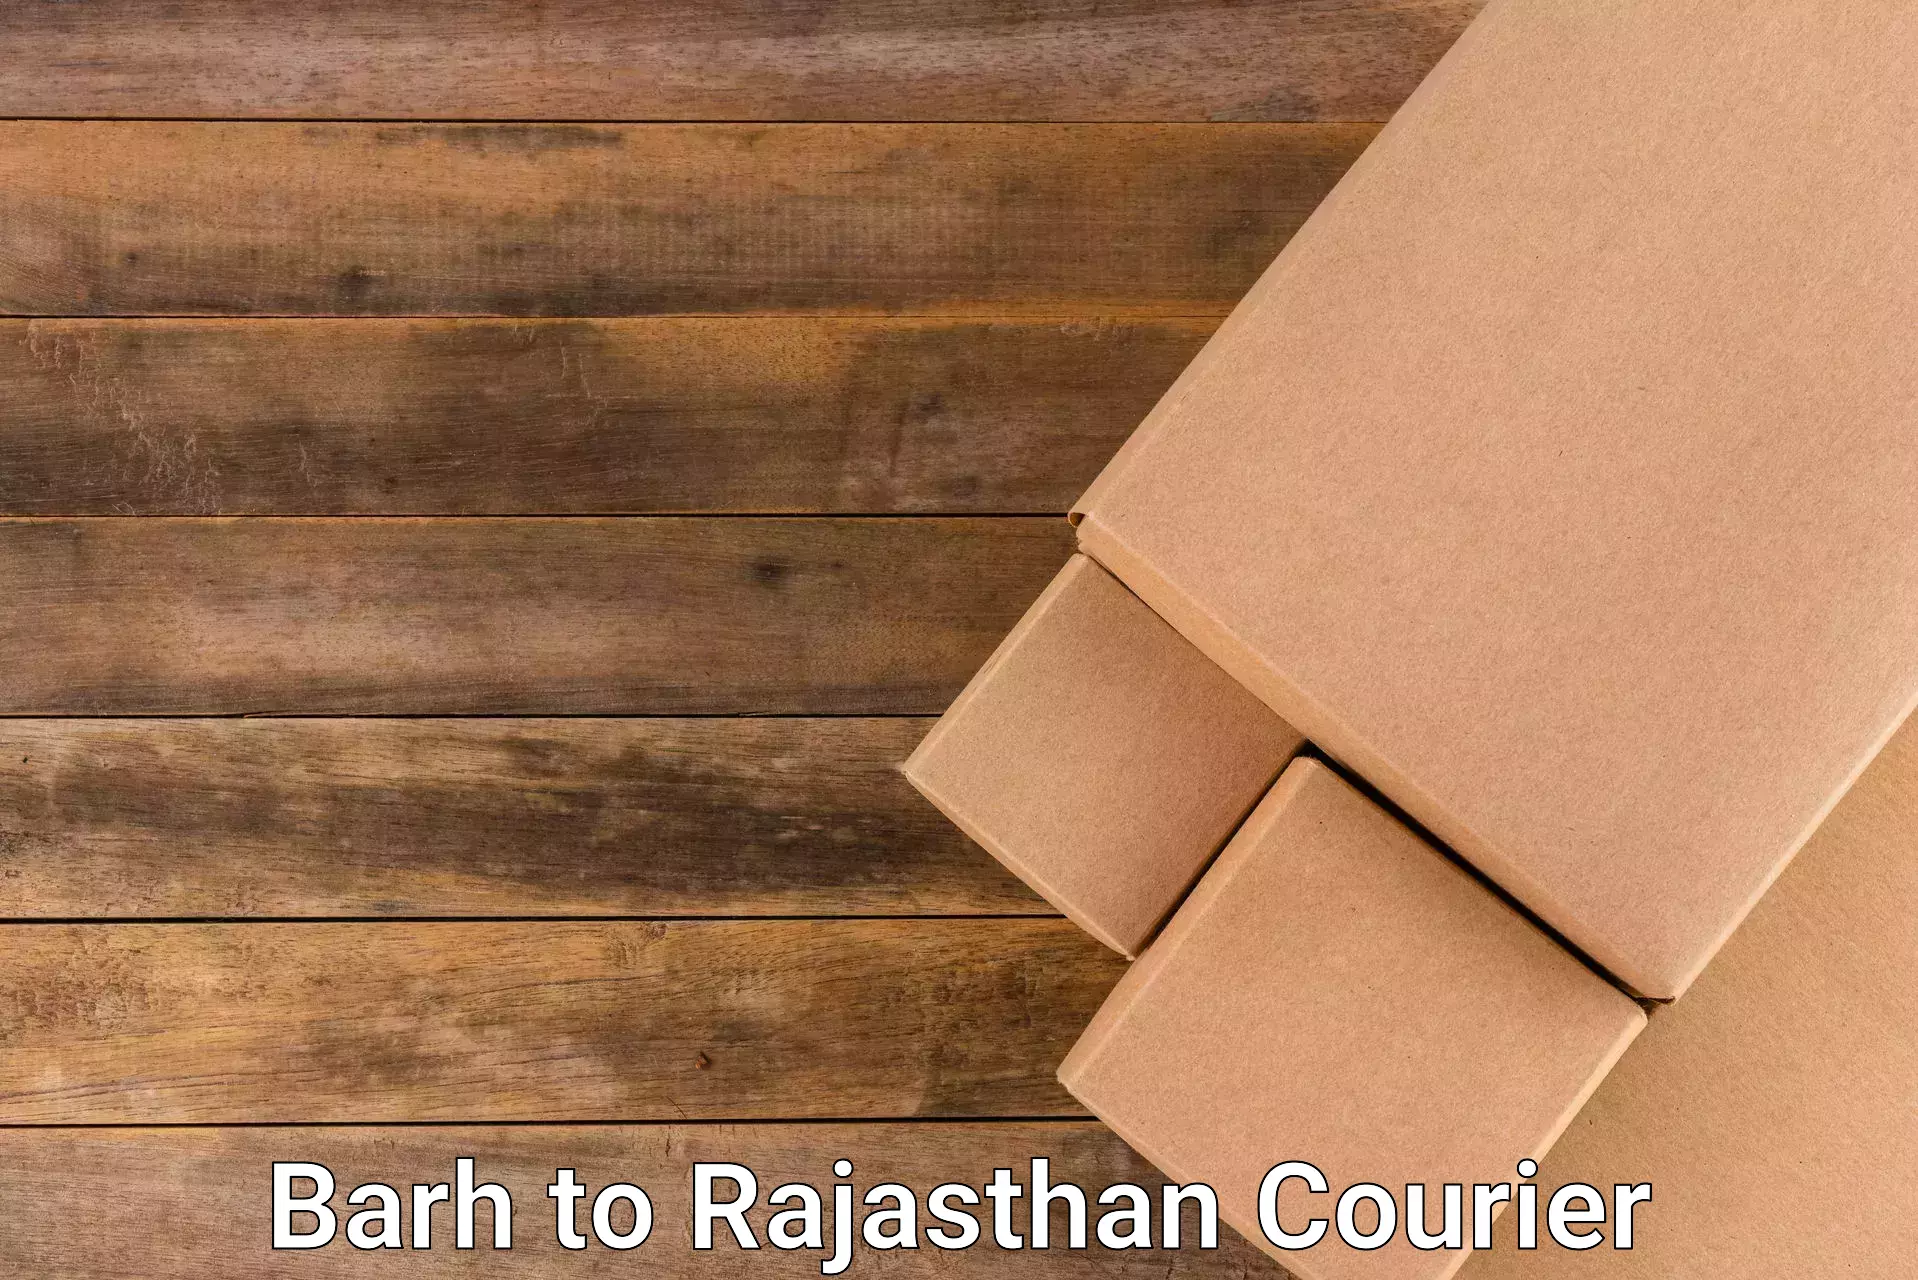 Courier service partnerships Barh to Rajasthan